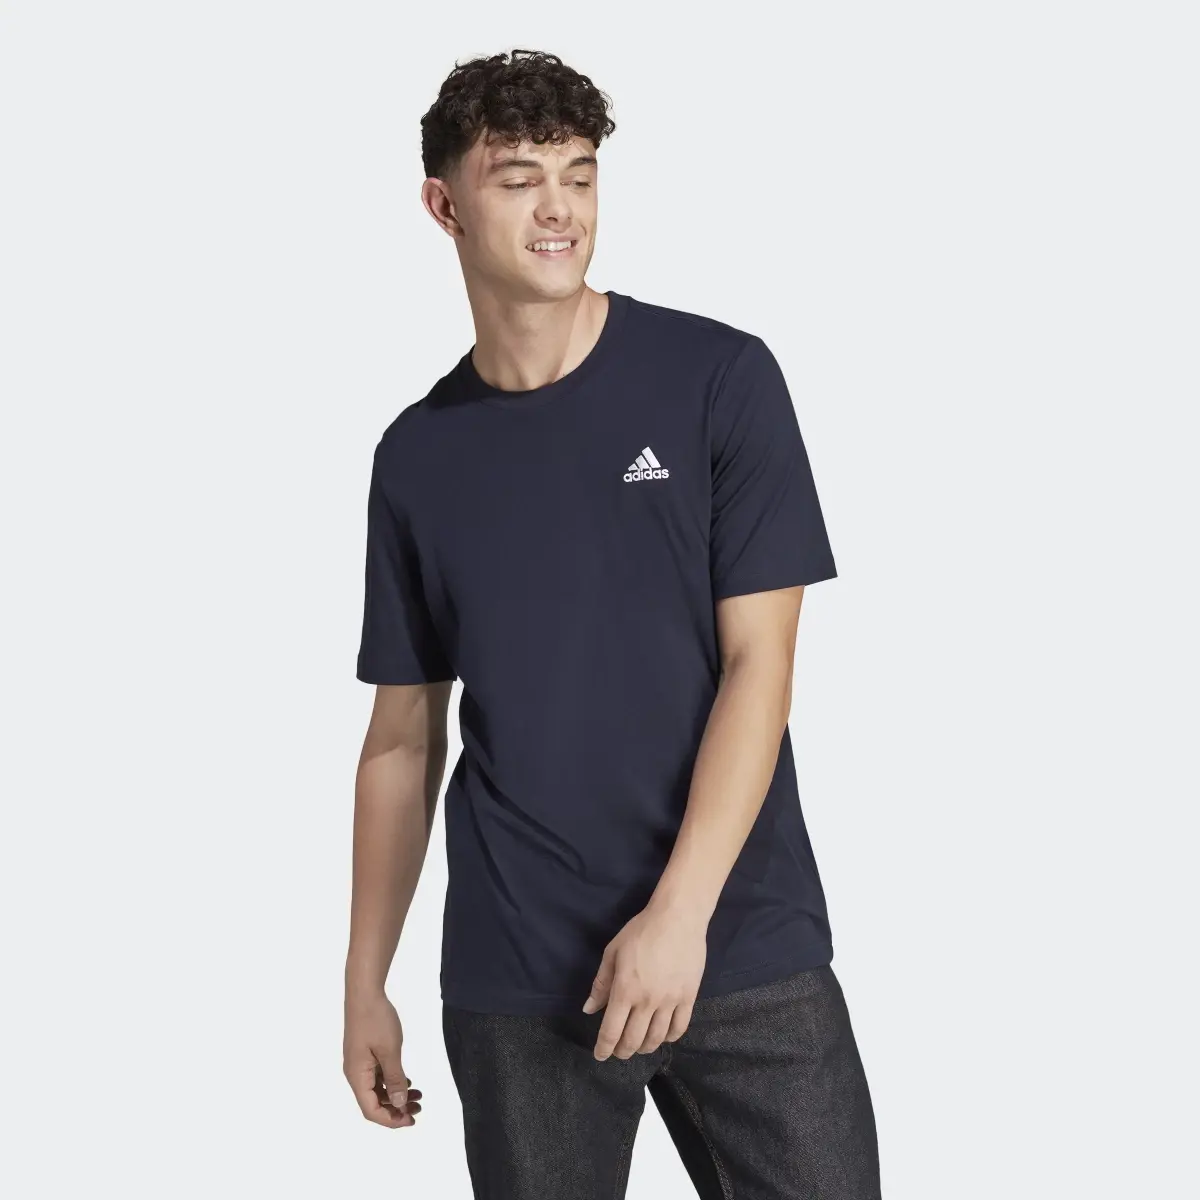 Adidas Essentials Single Jersey Embroidered Small Logo T-Shirt. 2